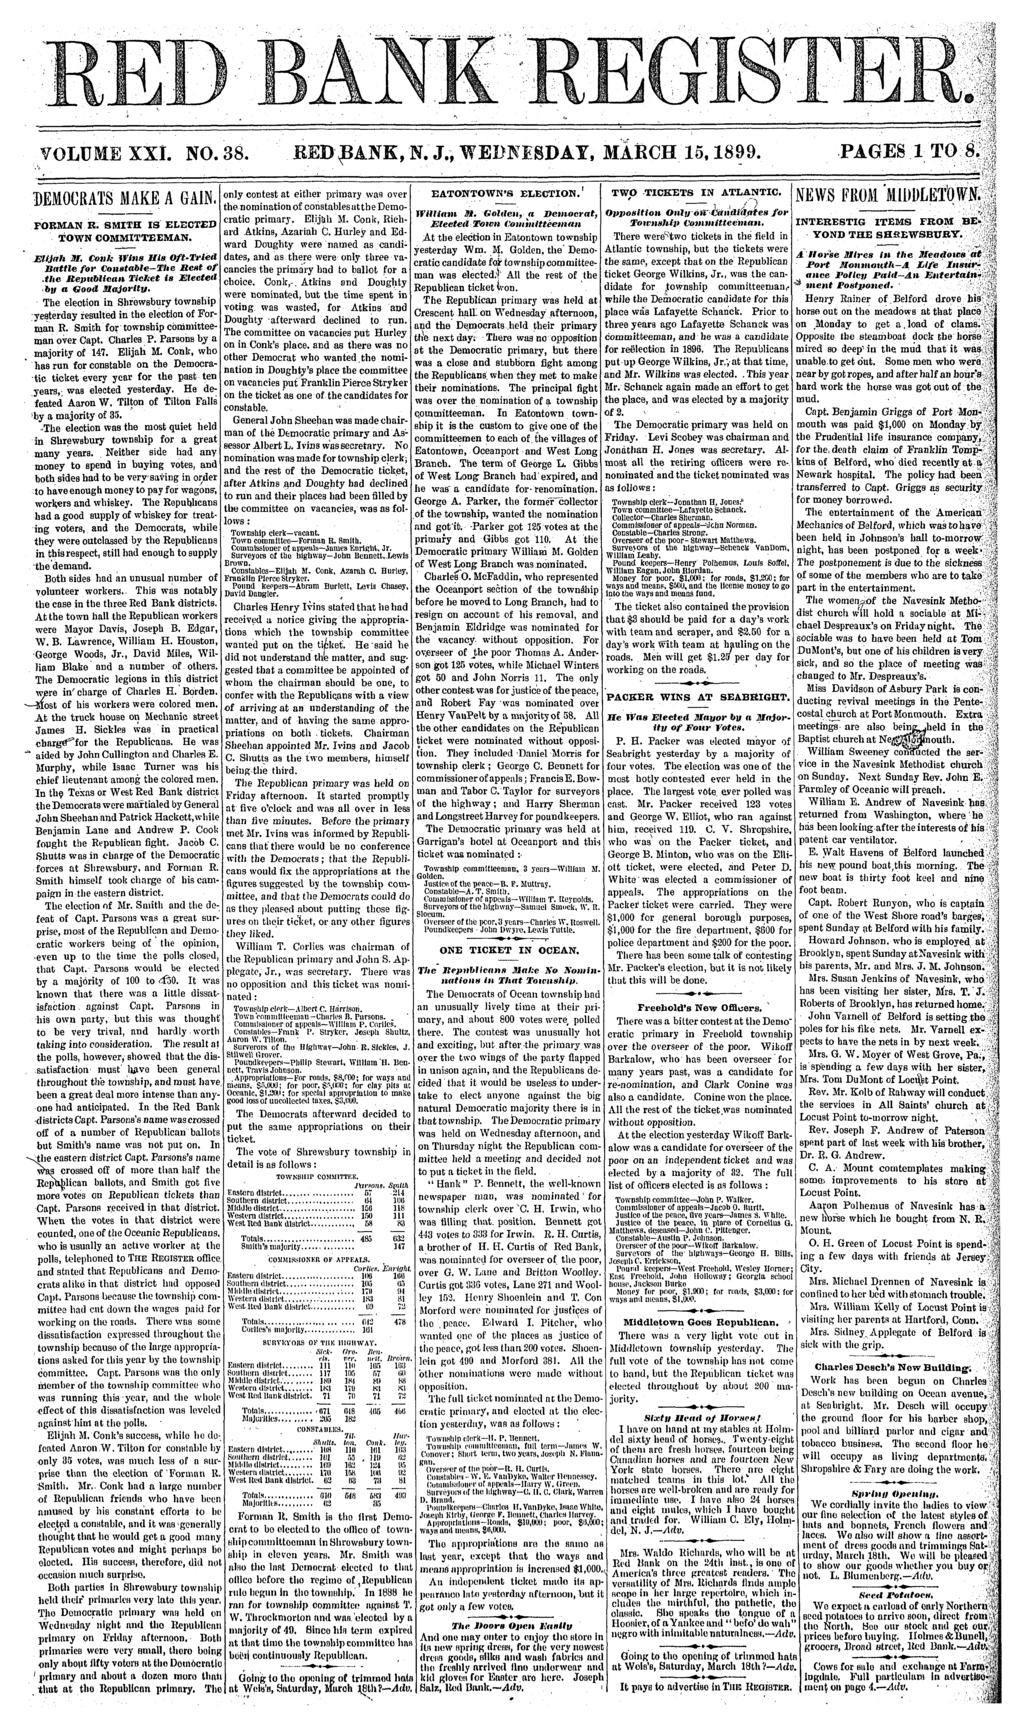 VOLUME XXL NO. 38. RED^ANK, N. J., WEDNESDAY, MARCH 15,1899. PAGES 1 TO 8, DEMOCRATS MAKE A GAIN. FOEMAN K. SMITH IS ELECTED TOWN COMMITTEEMAN. Eljah HI.